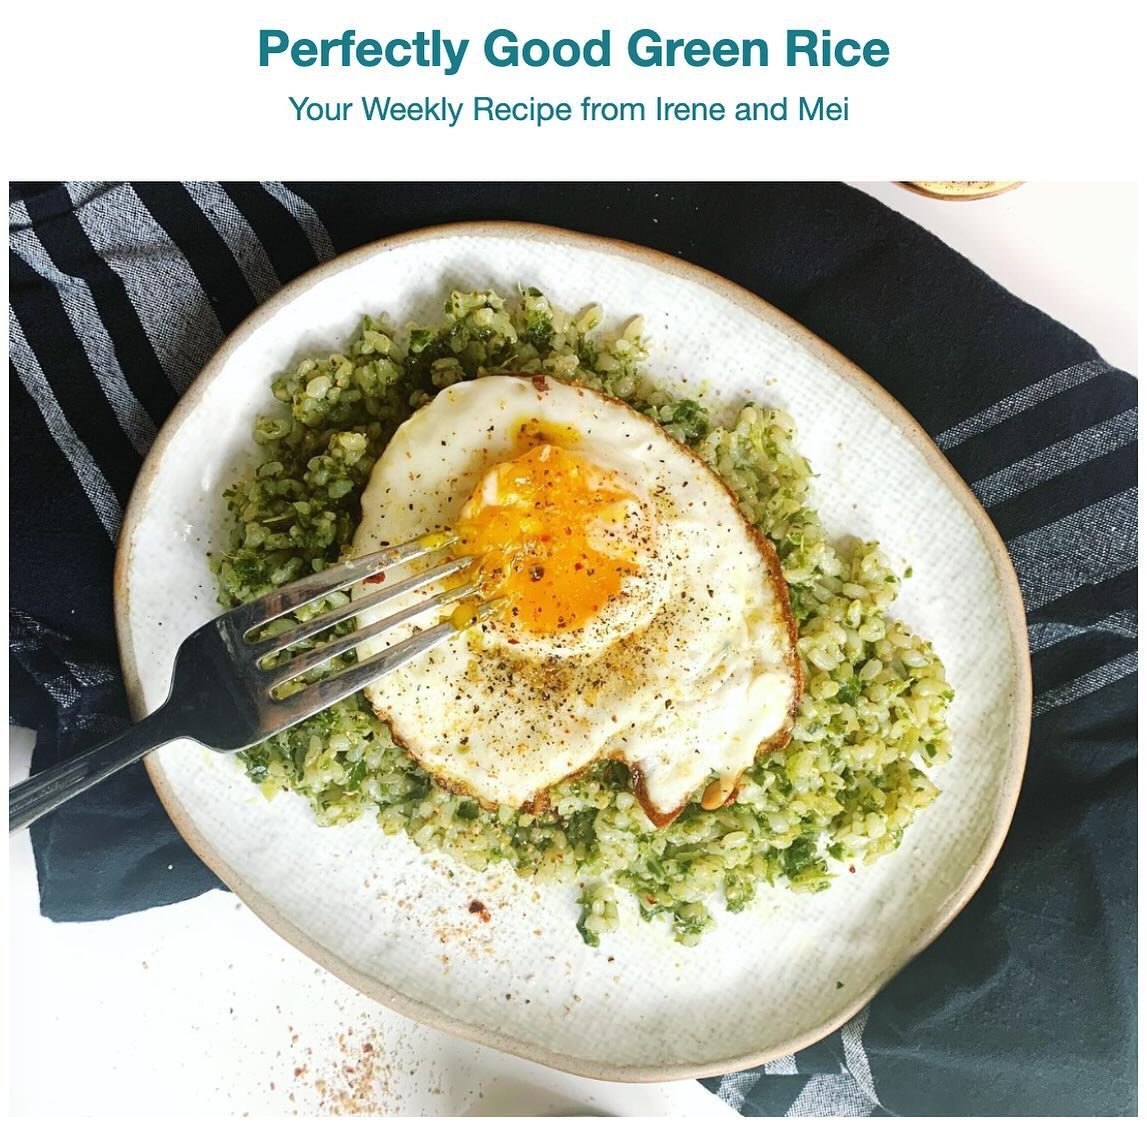 🍳We have a recipe for you this Sunday, to prep for the week ahead! Try out our Perfectly Good Green Rice🥦🍚 

Quick, easy, customizable, and talk about a comfort food that is secretly loaded with all the greens🥬

Green rice made from broccoli-carr